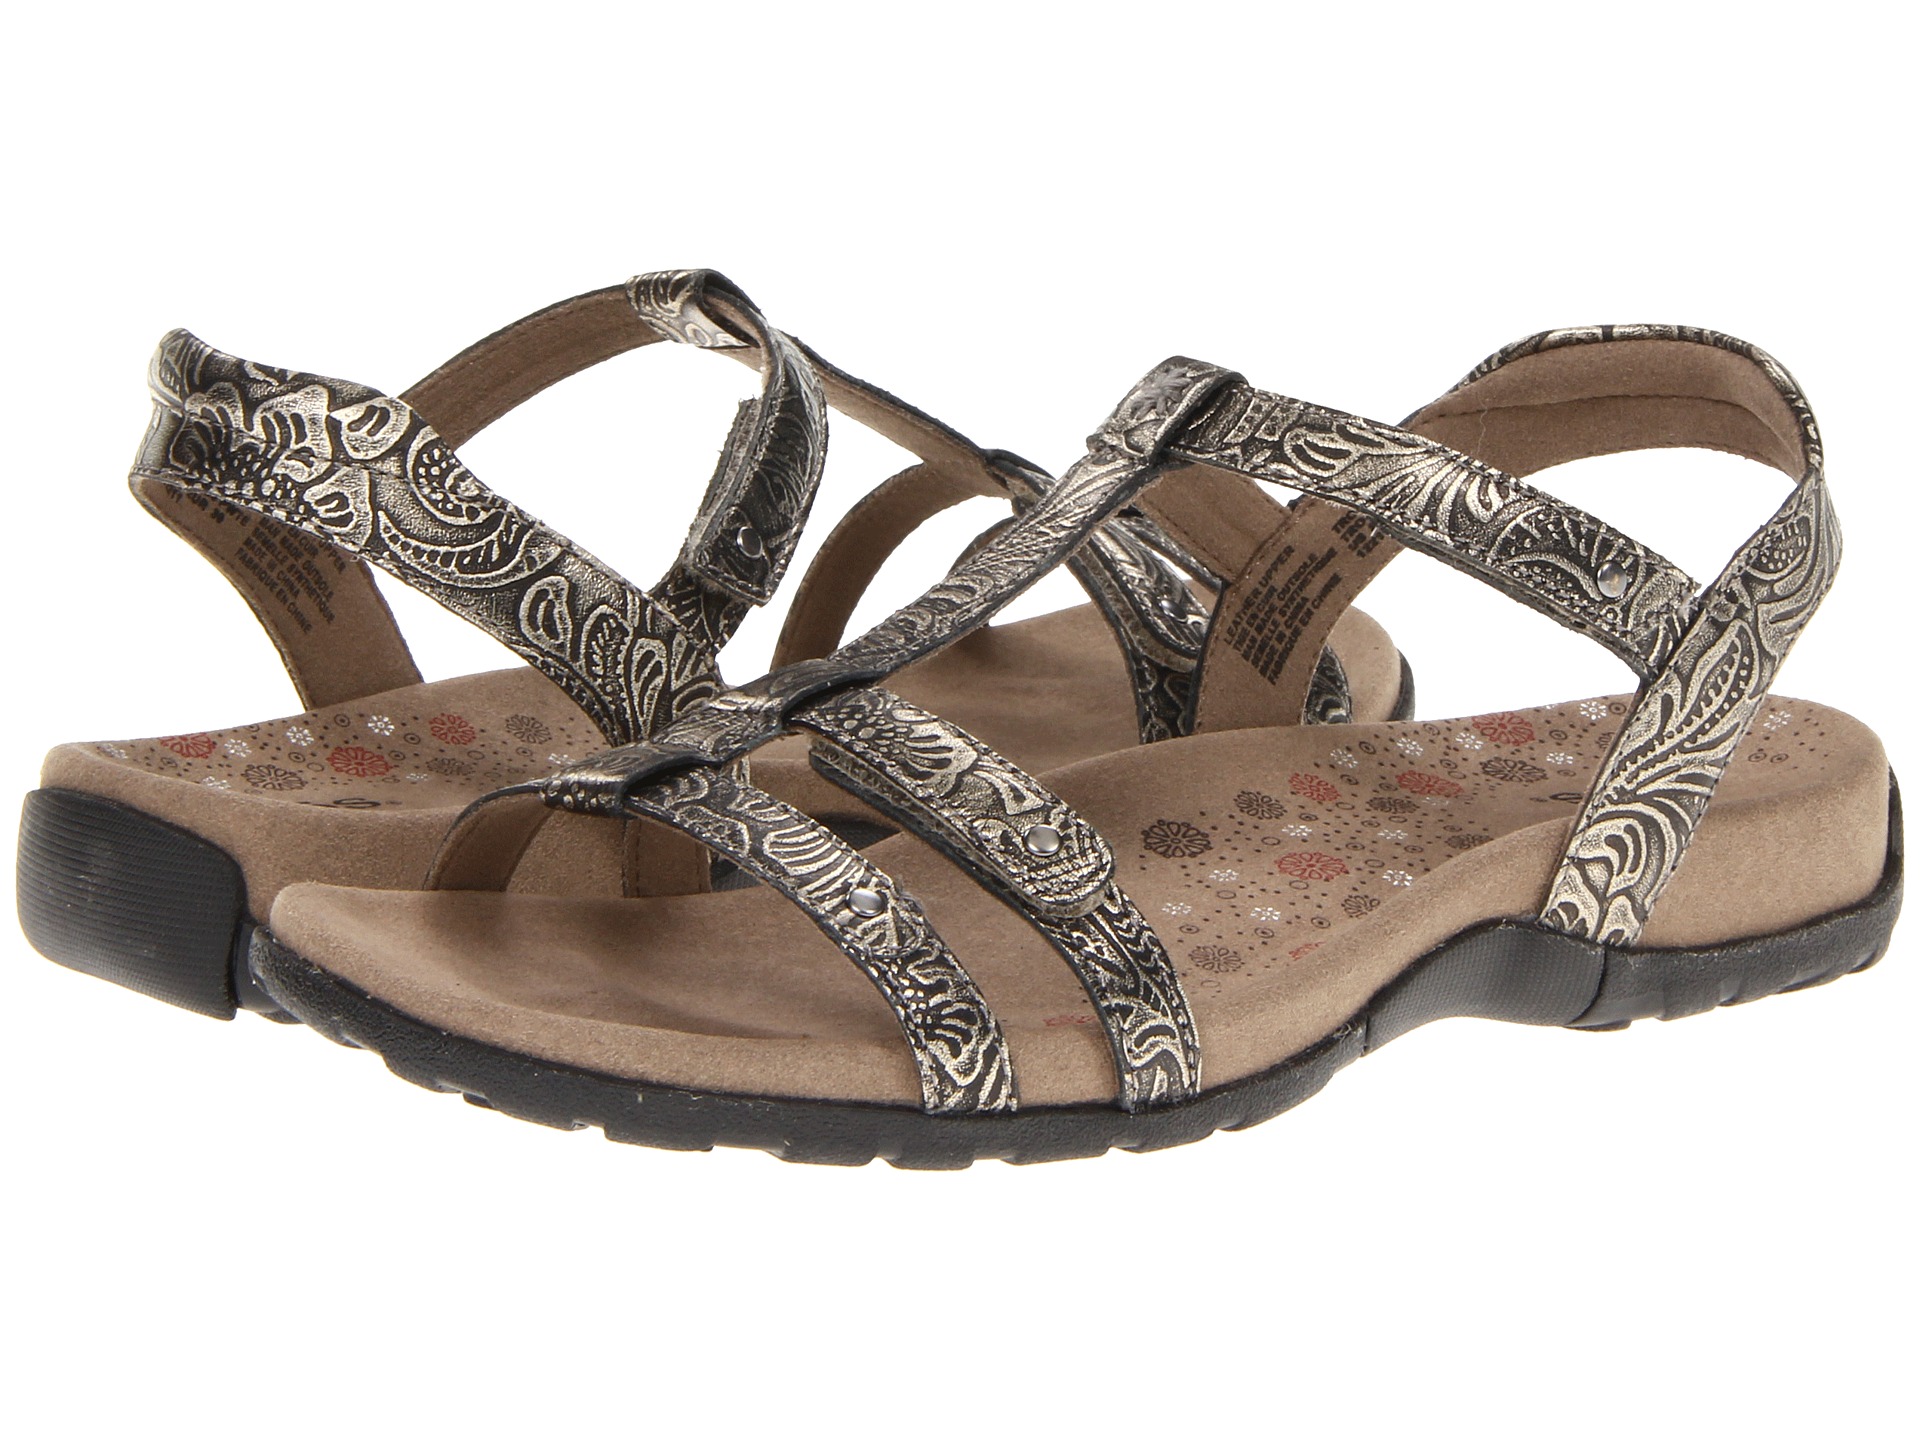 Zappos Taos Shoes Dkny Sandals